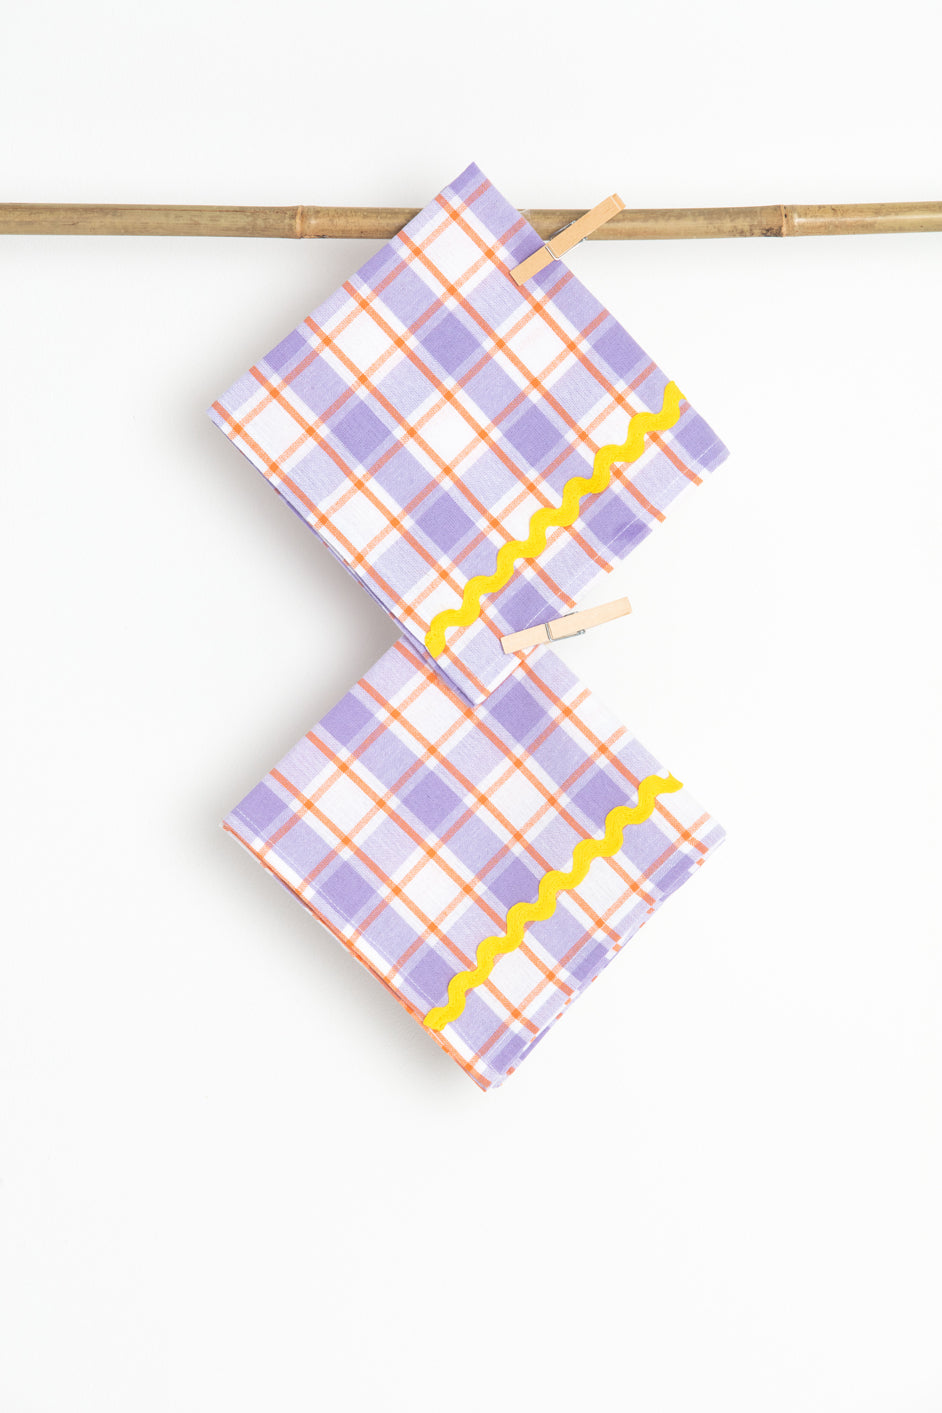 A Pair of Purple and Yellow Napkins